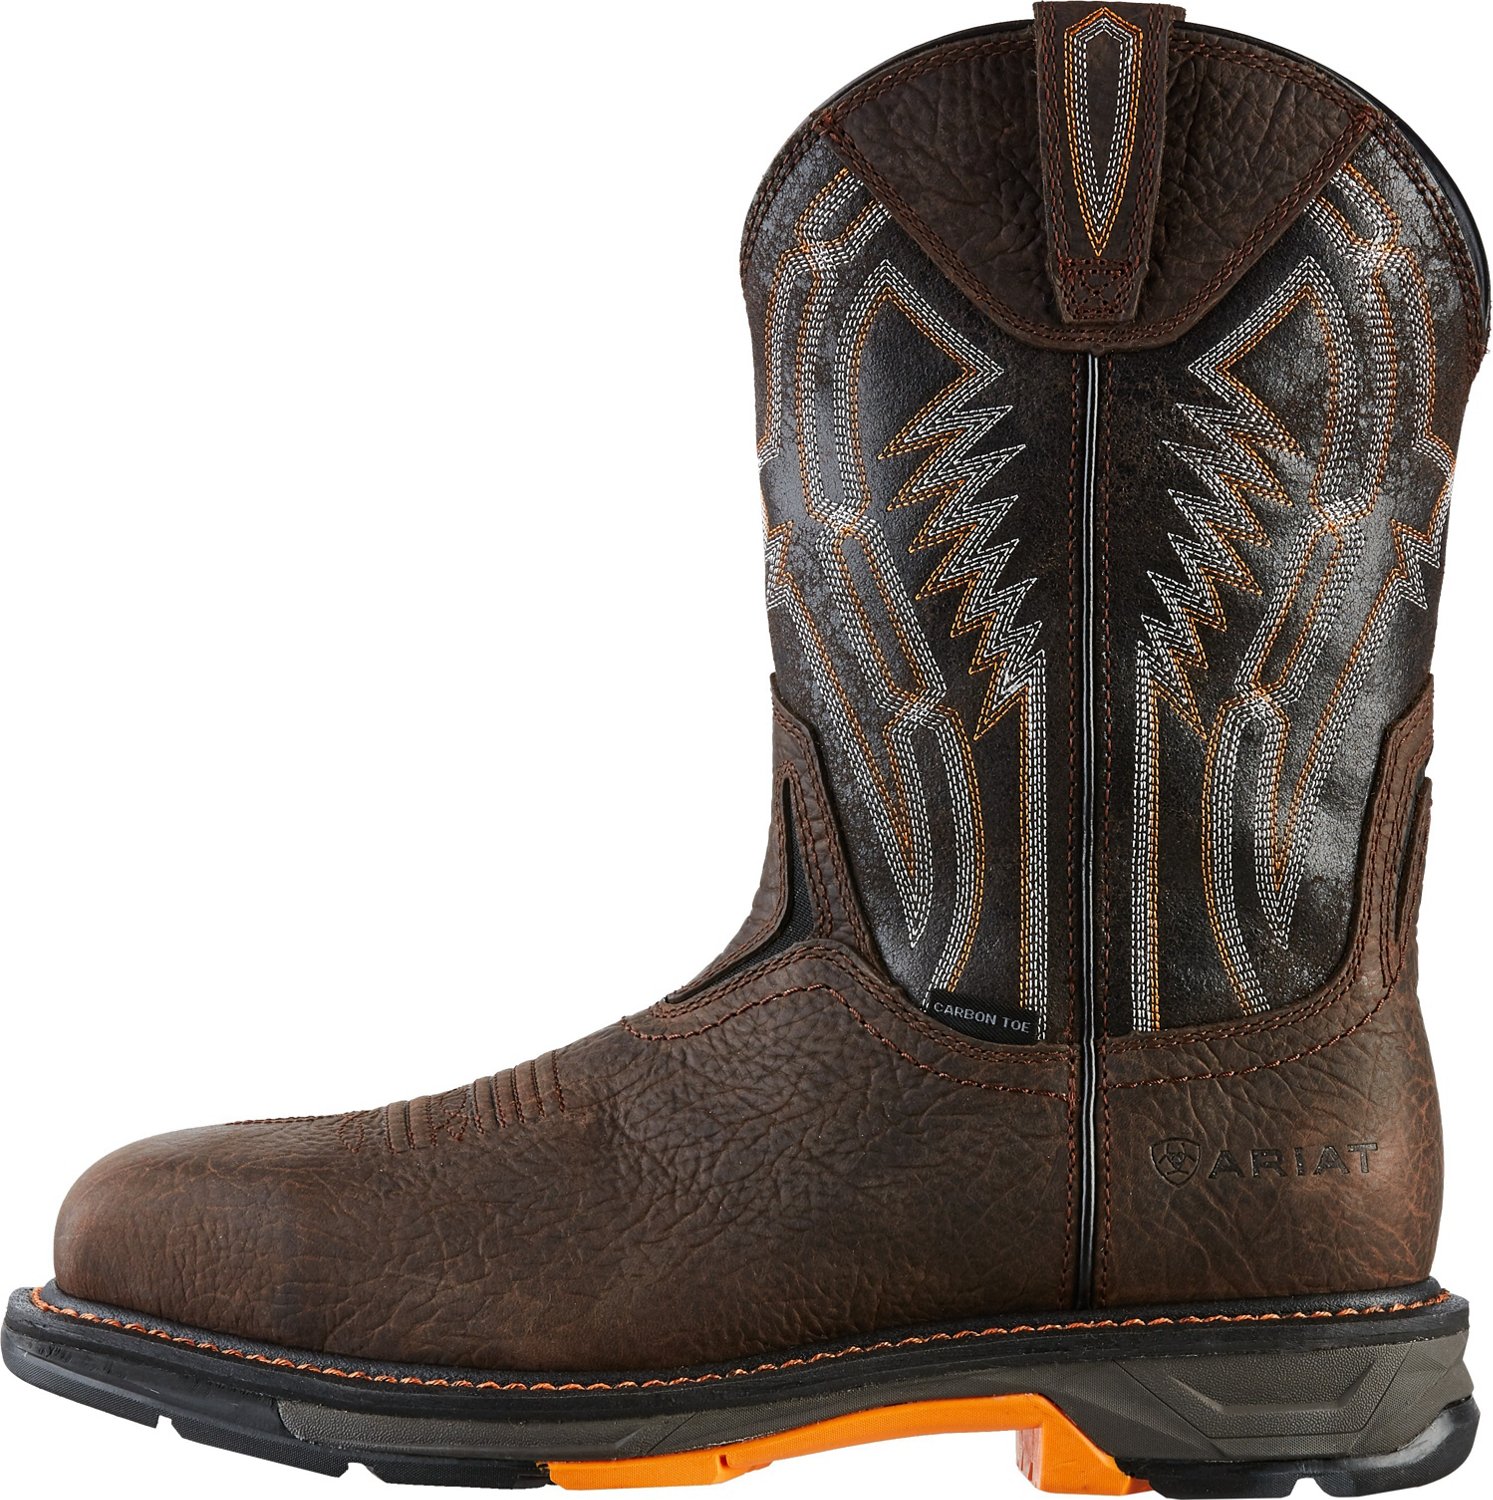 Ariat Men's WorkHog XT Dare Work Boots | Free Shipping at Academy